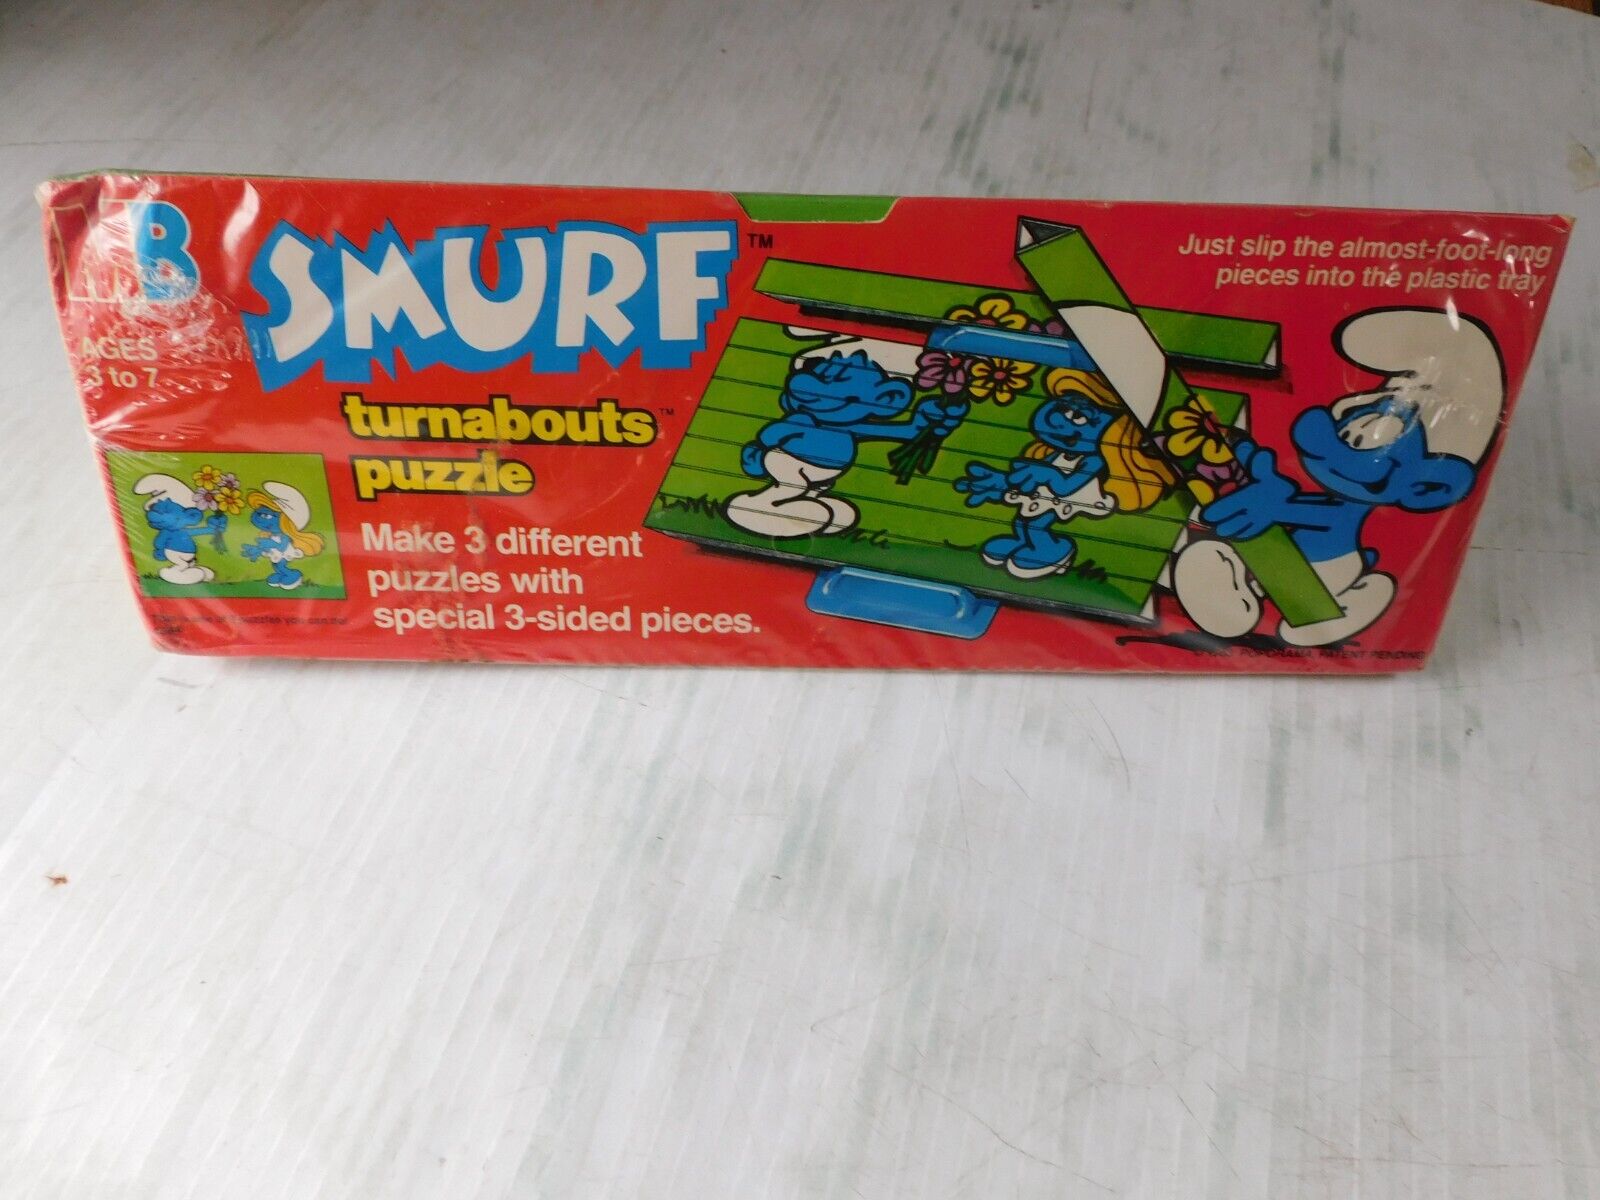 Smurf Turnabouts Puzzle makes 3 different puzzles MB 1983 Peyo new sealed